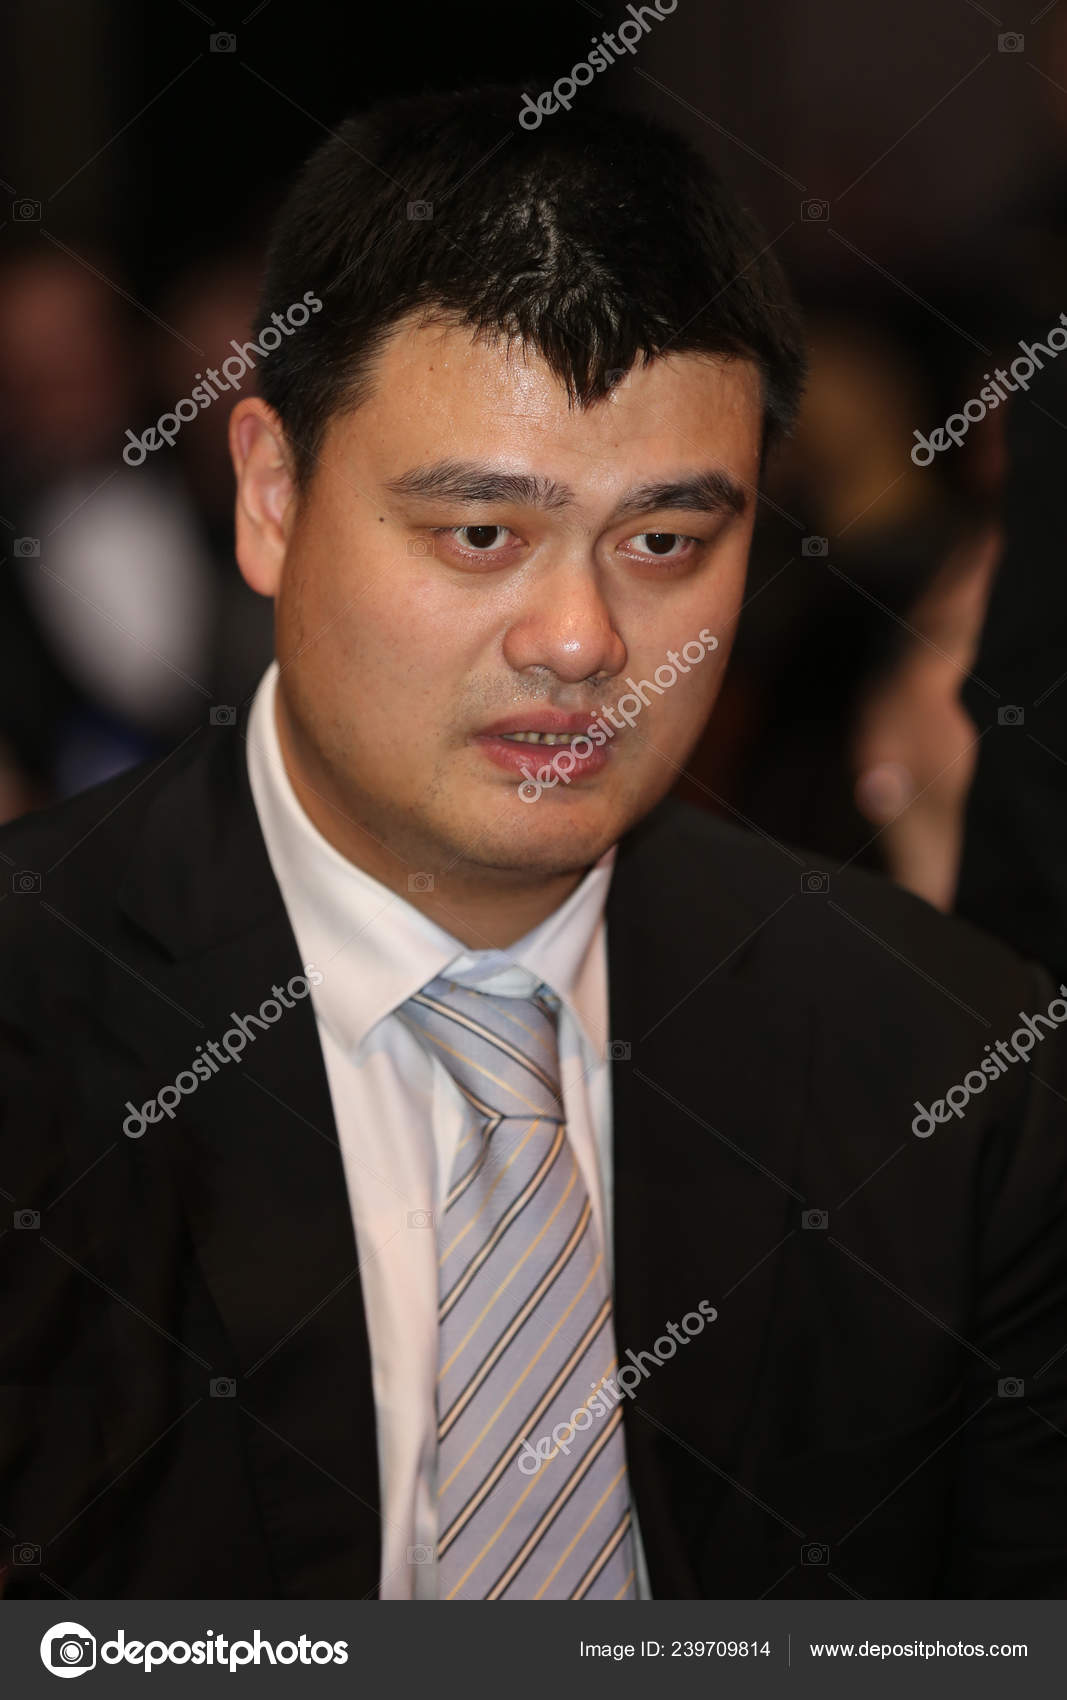 Chinese Basketball Superstar Yao Ming Retires